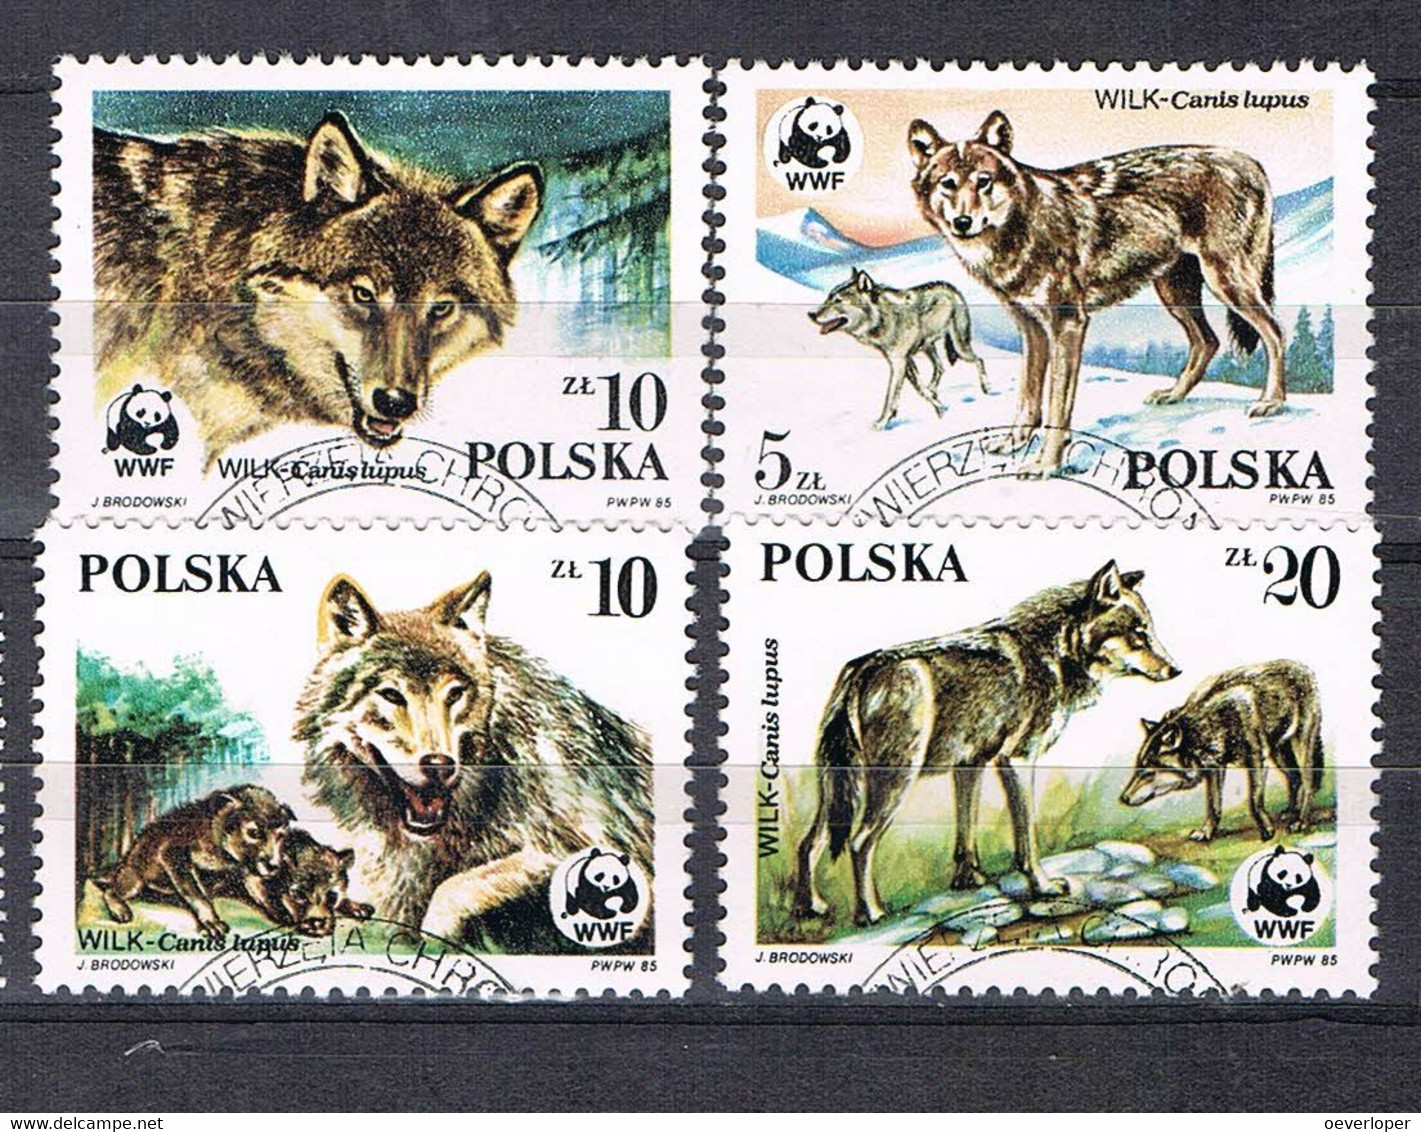 Poland Wolves 1985 WWF Used - Used Stamps